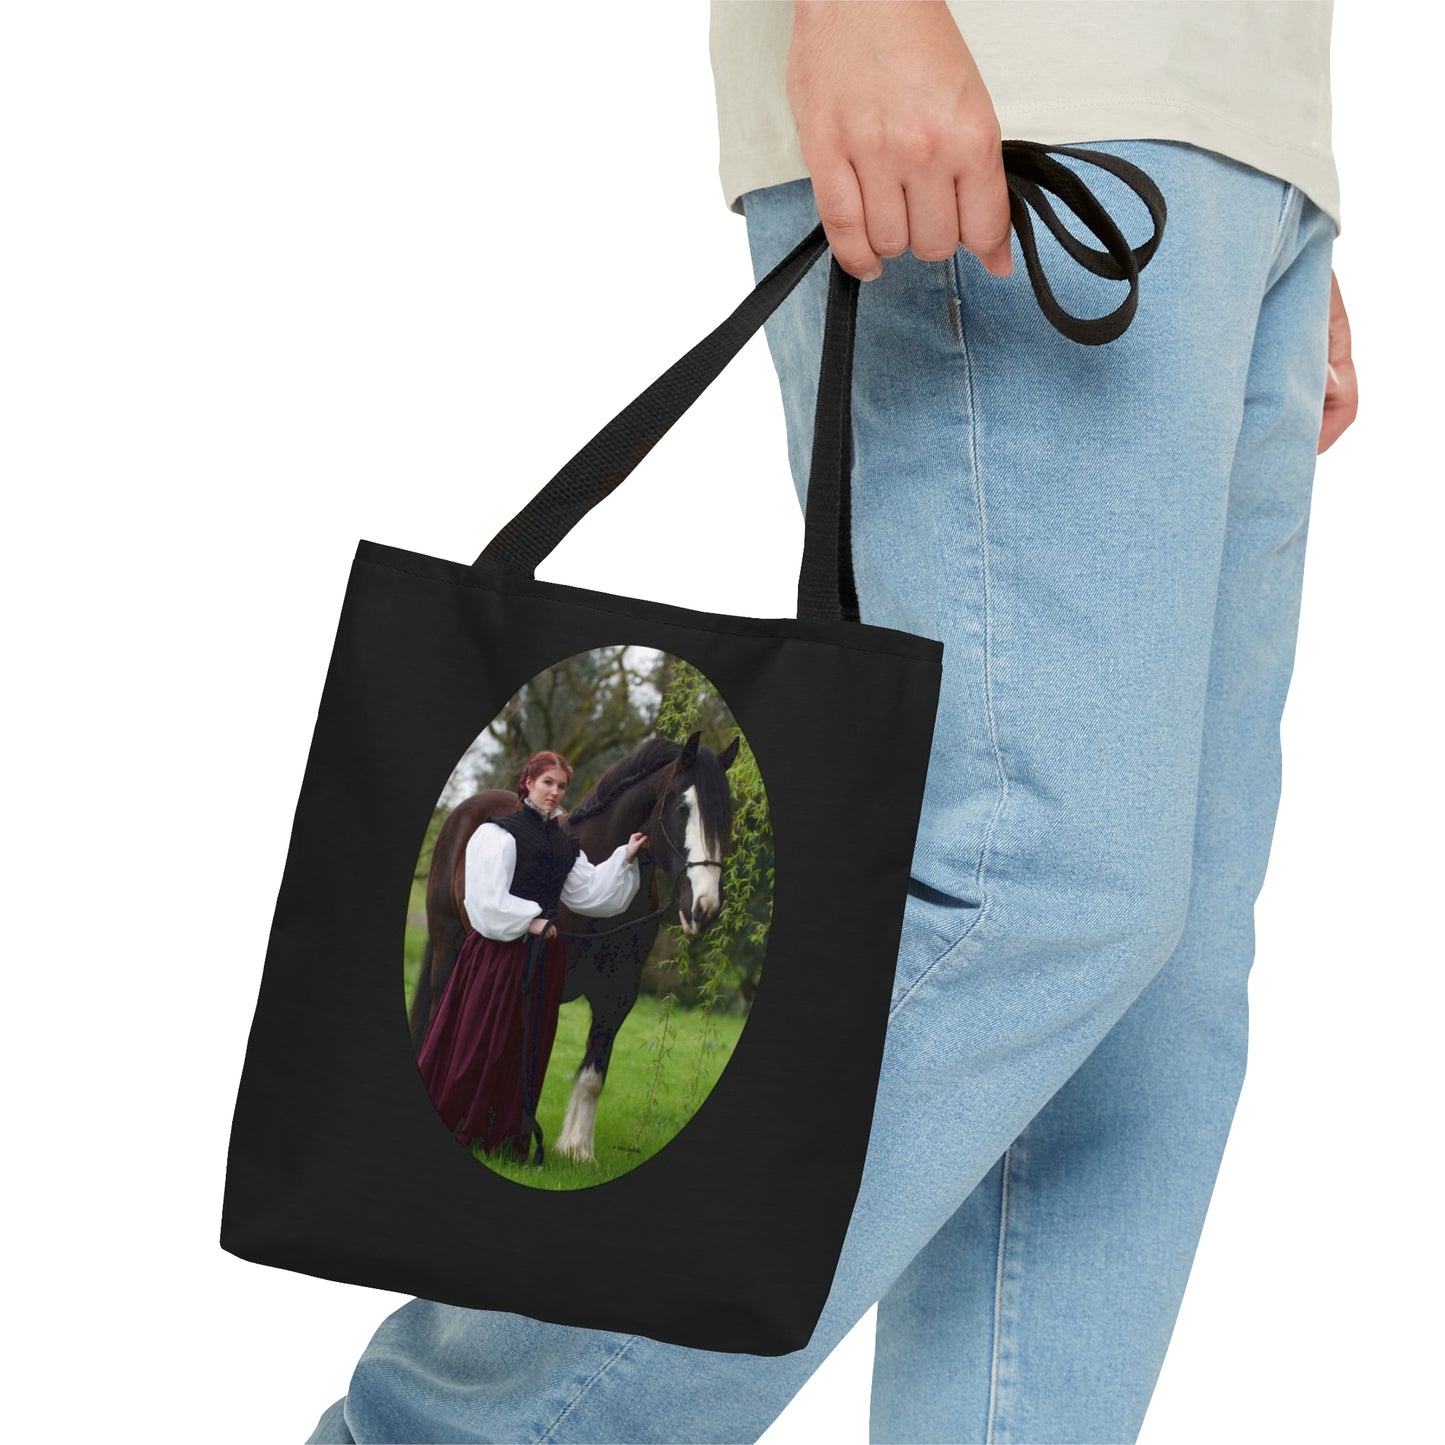 The Lady and the Shire  Tote Bag (AOP)